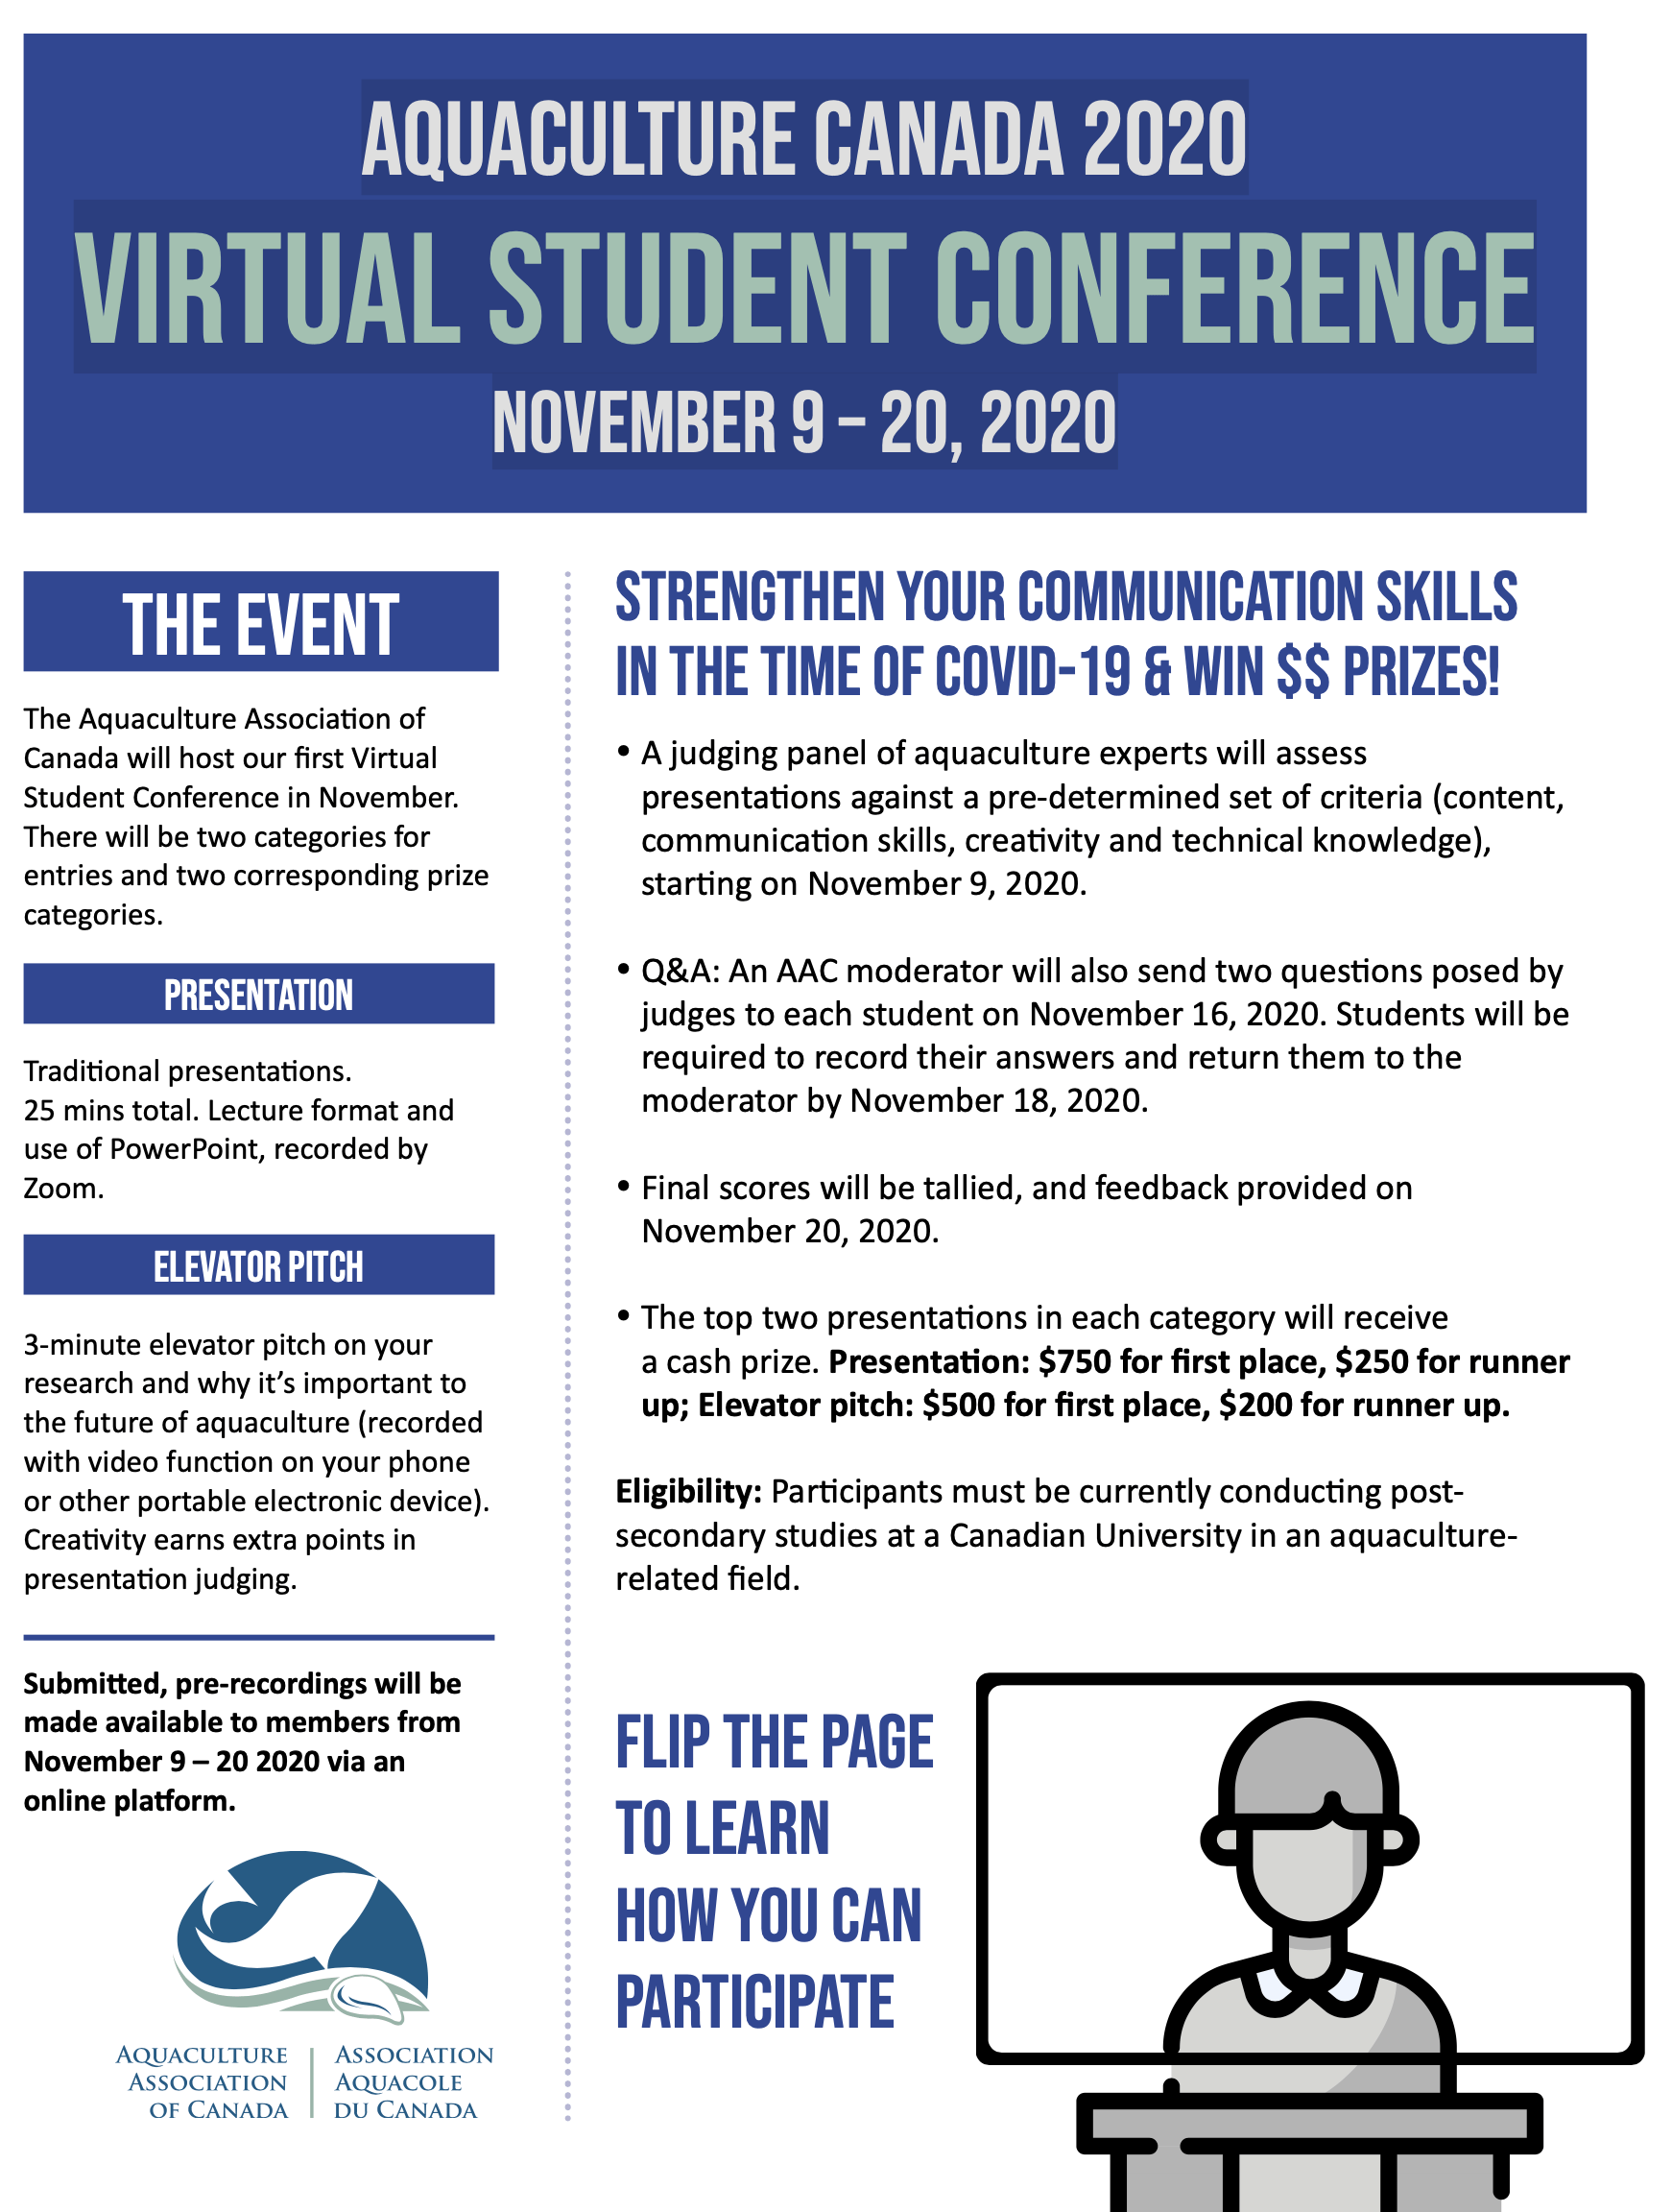 1 virtual student conference